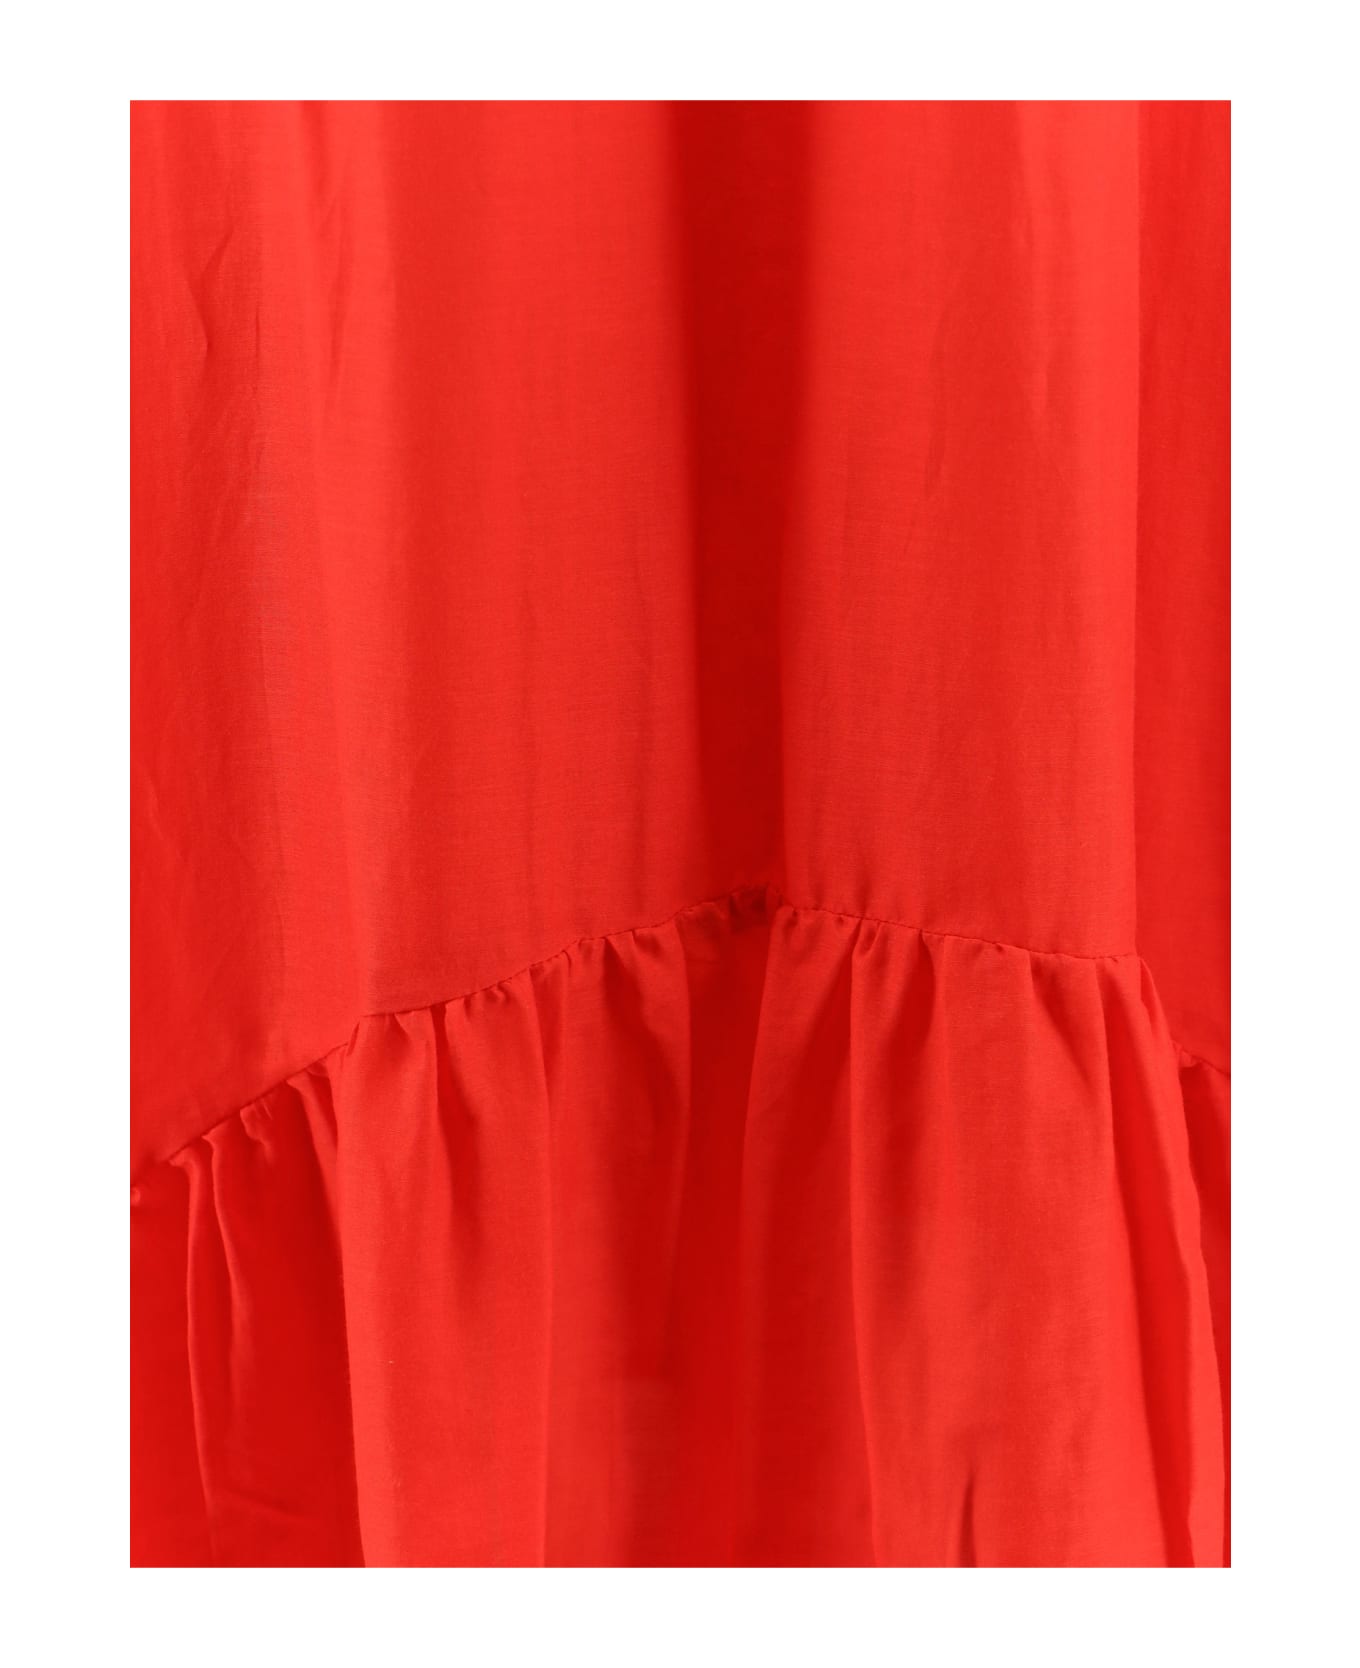 SEMICOUTURE Dress - Red